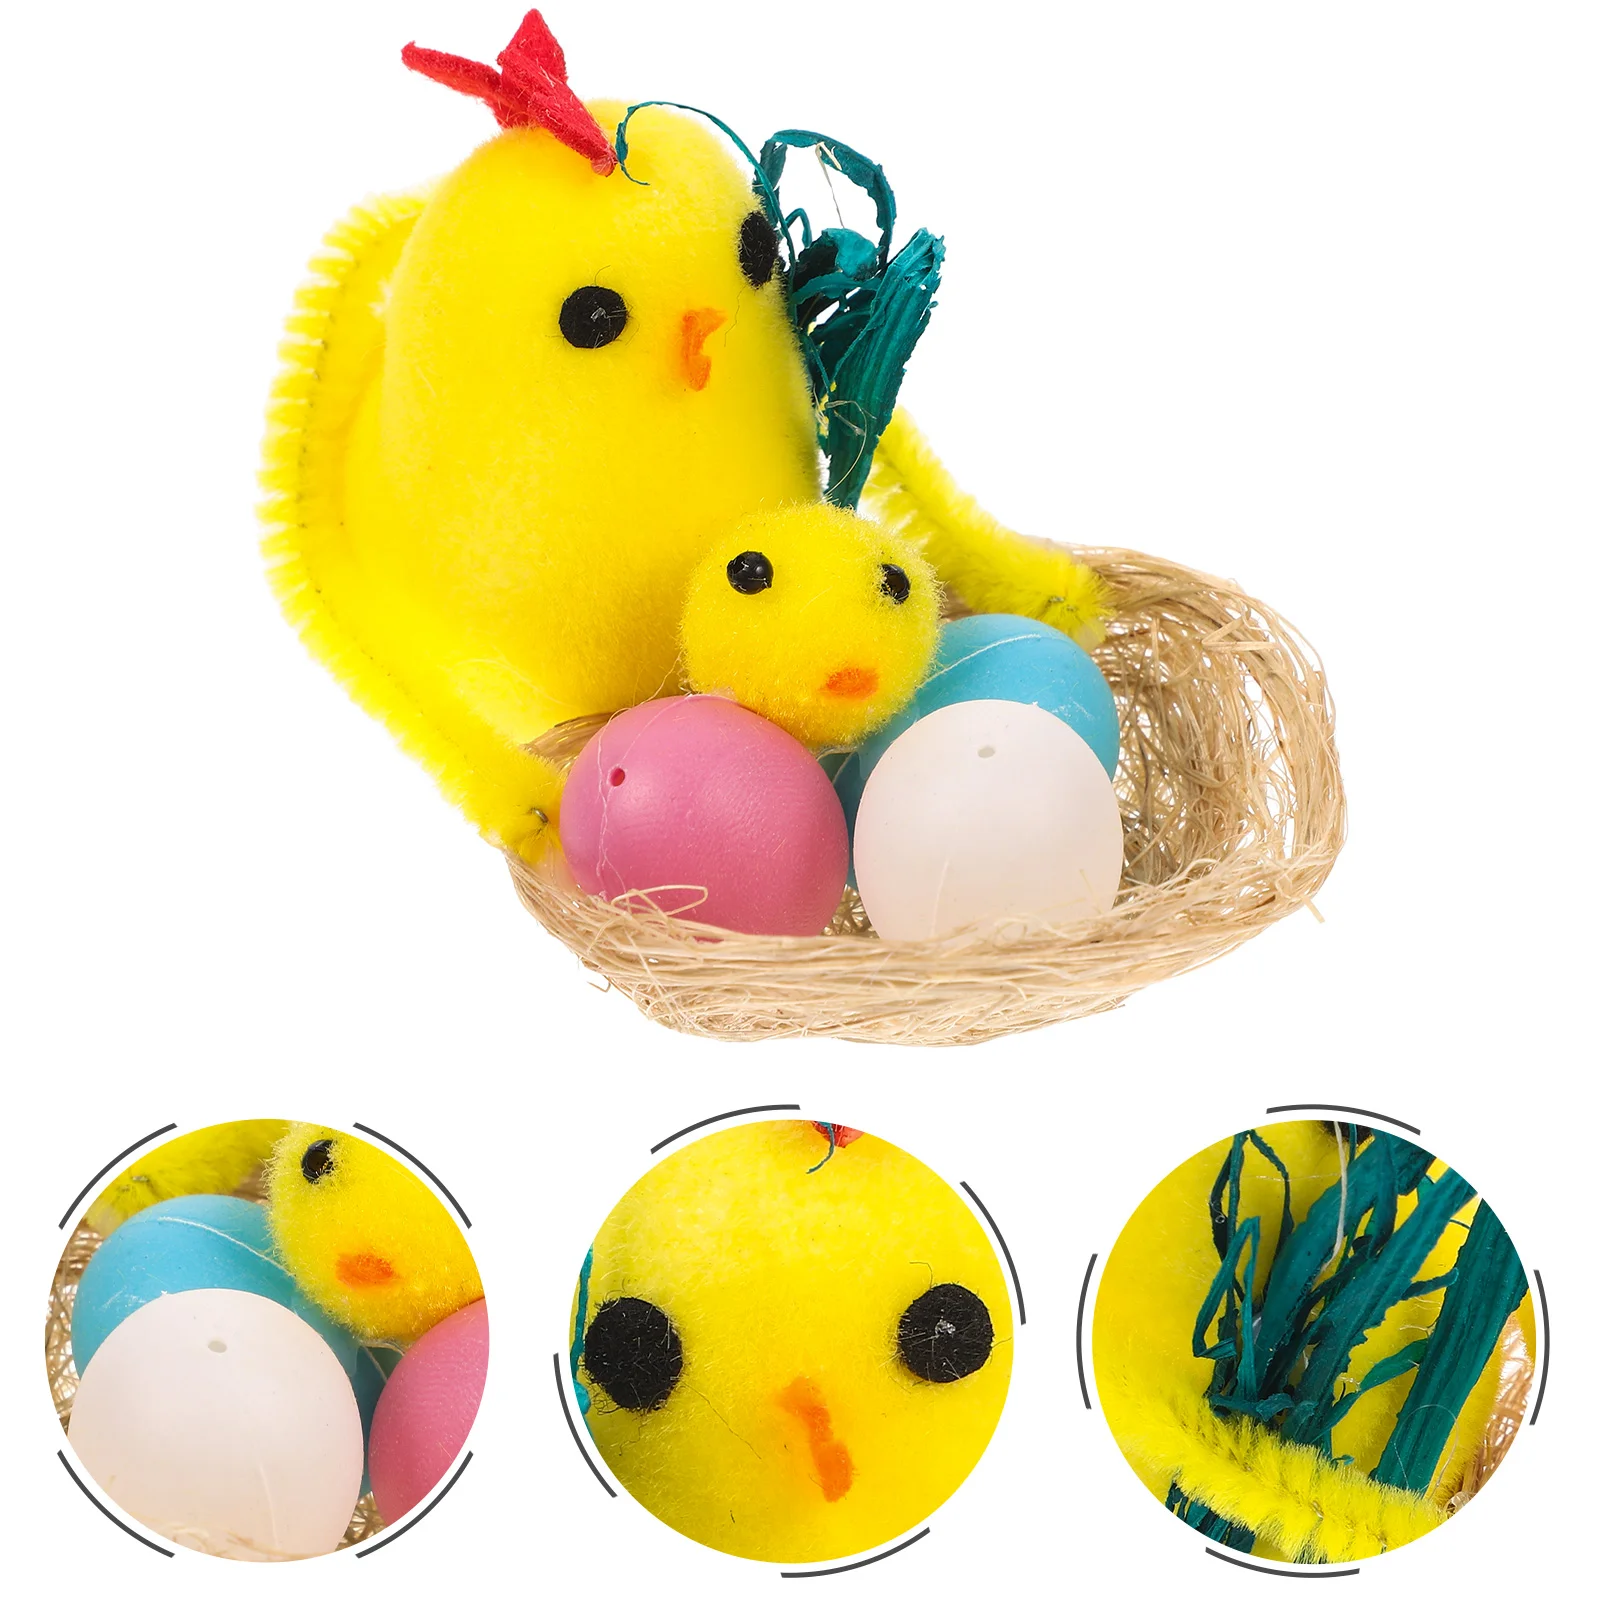 

Easter Chicken Chick Plush Egg Toy Chicks Mini Animal Party Supplies Hen Little Stuffed Ornaments Decor Figurine Realistic